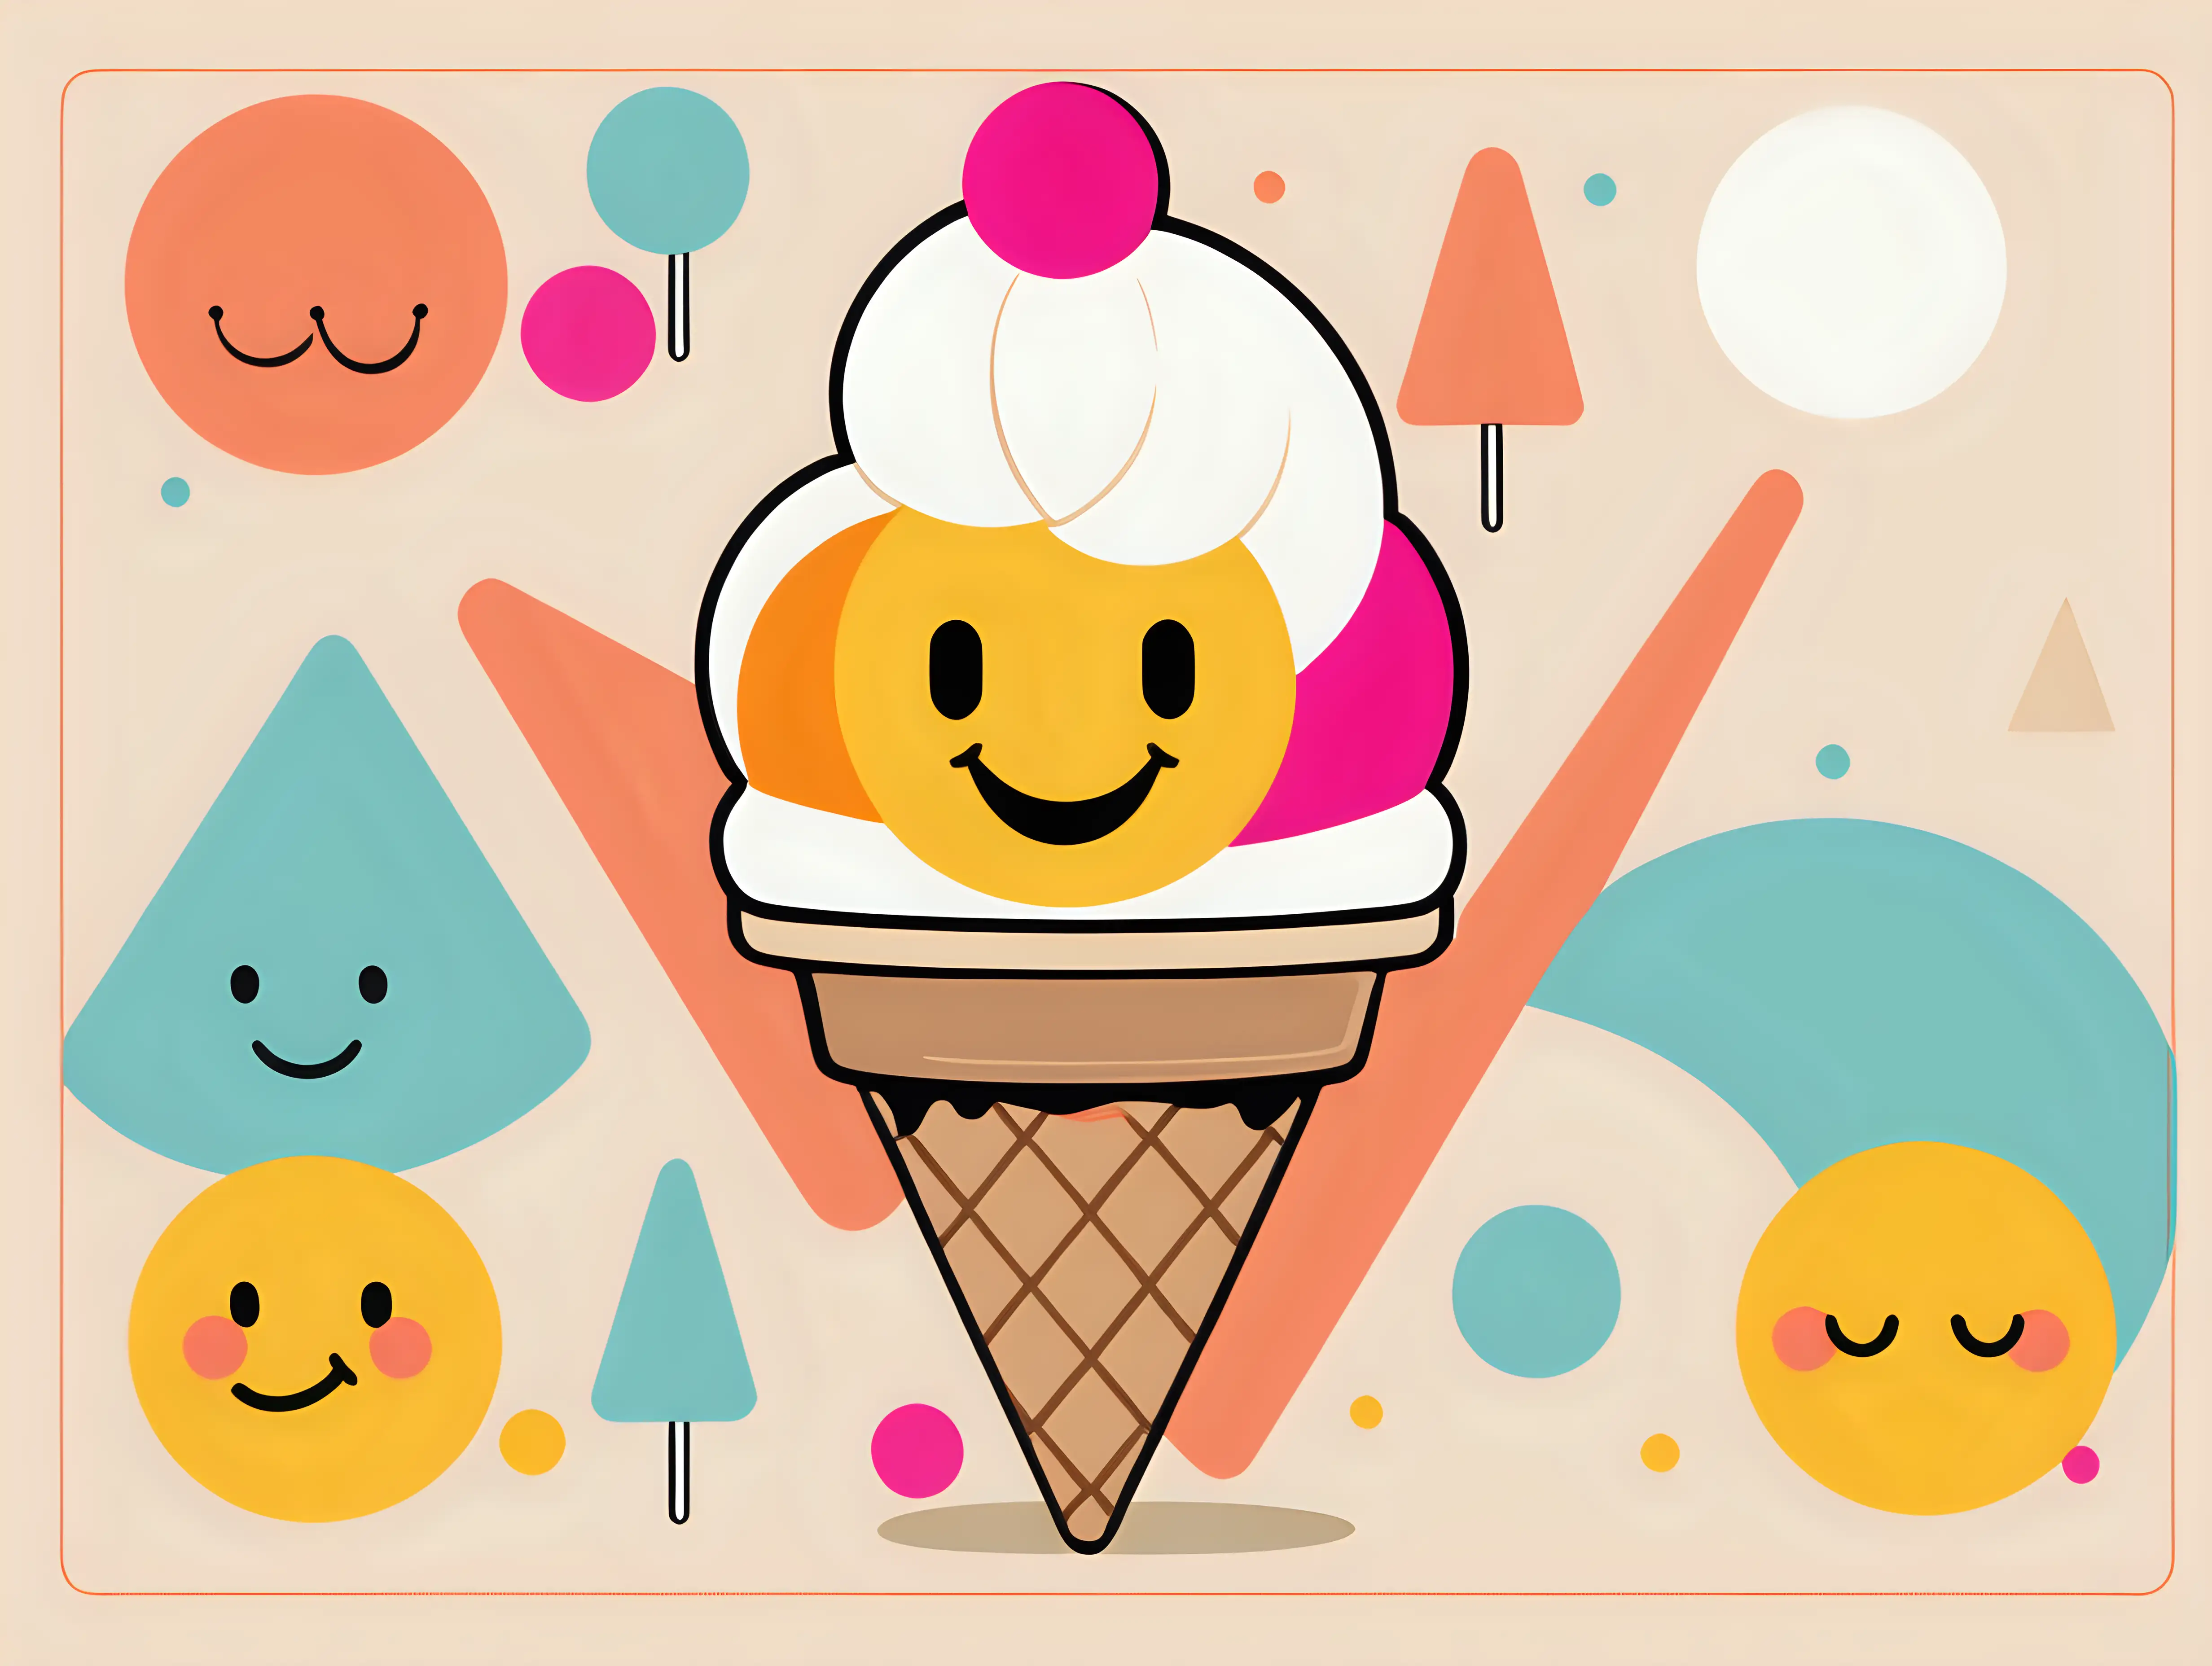 Smiley Face Ice Cream on Bright Geometric Shapes in Minimalist 1970s Retro Style